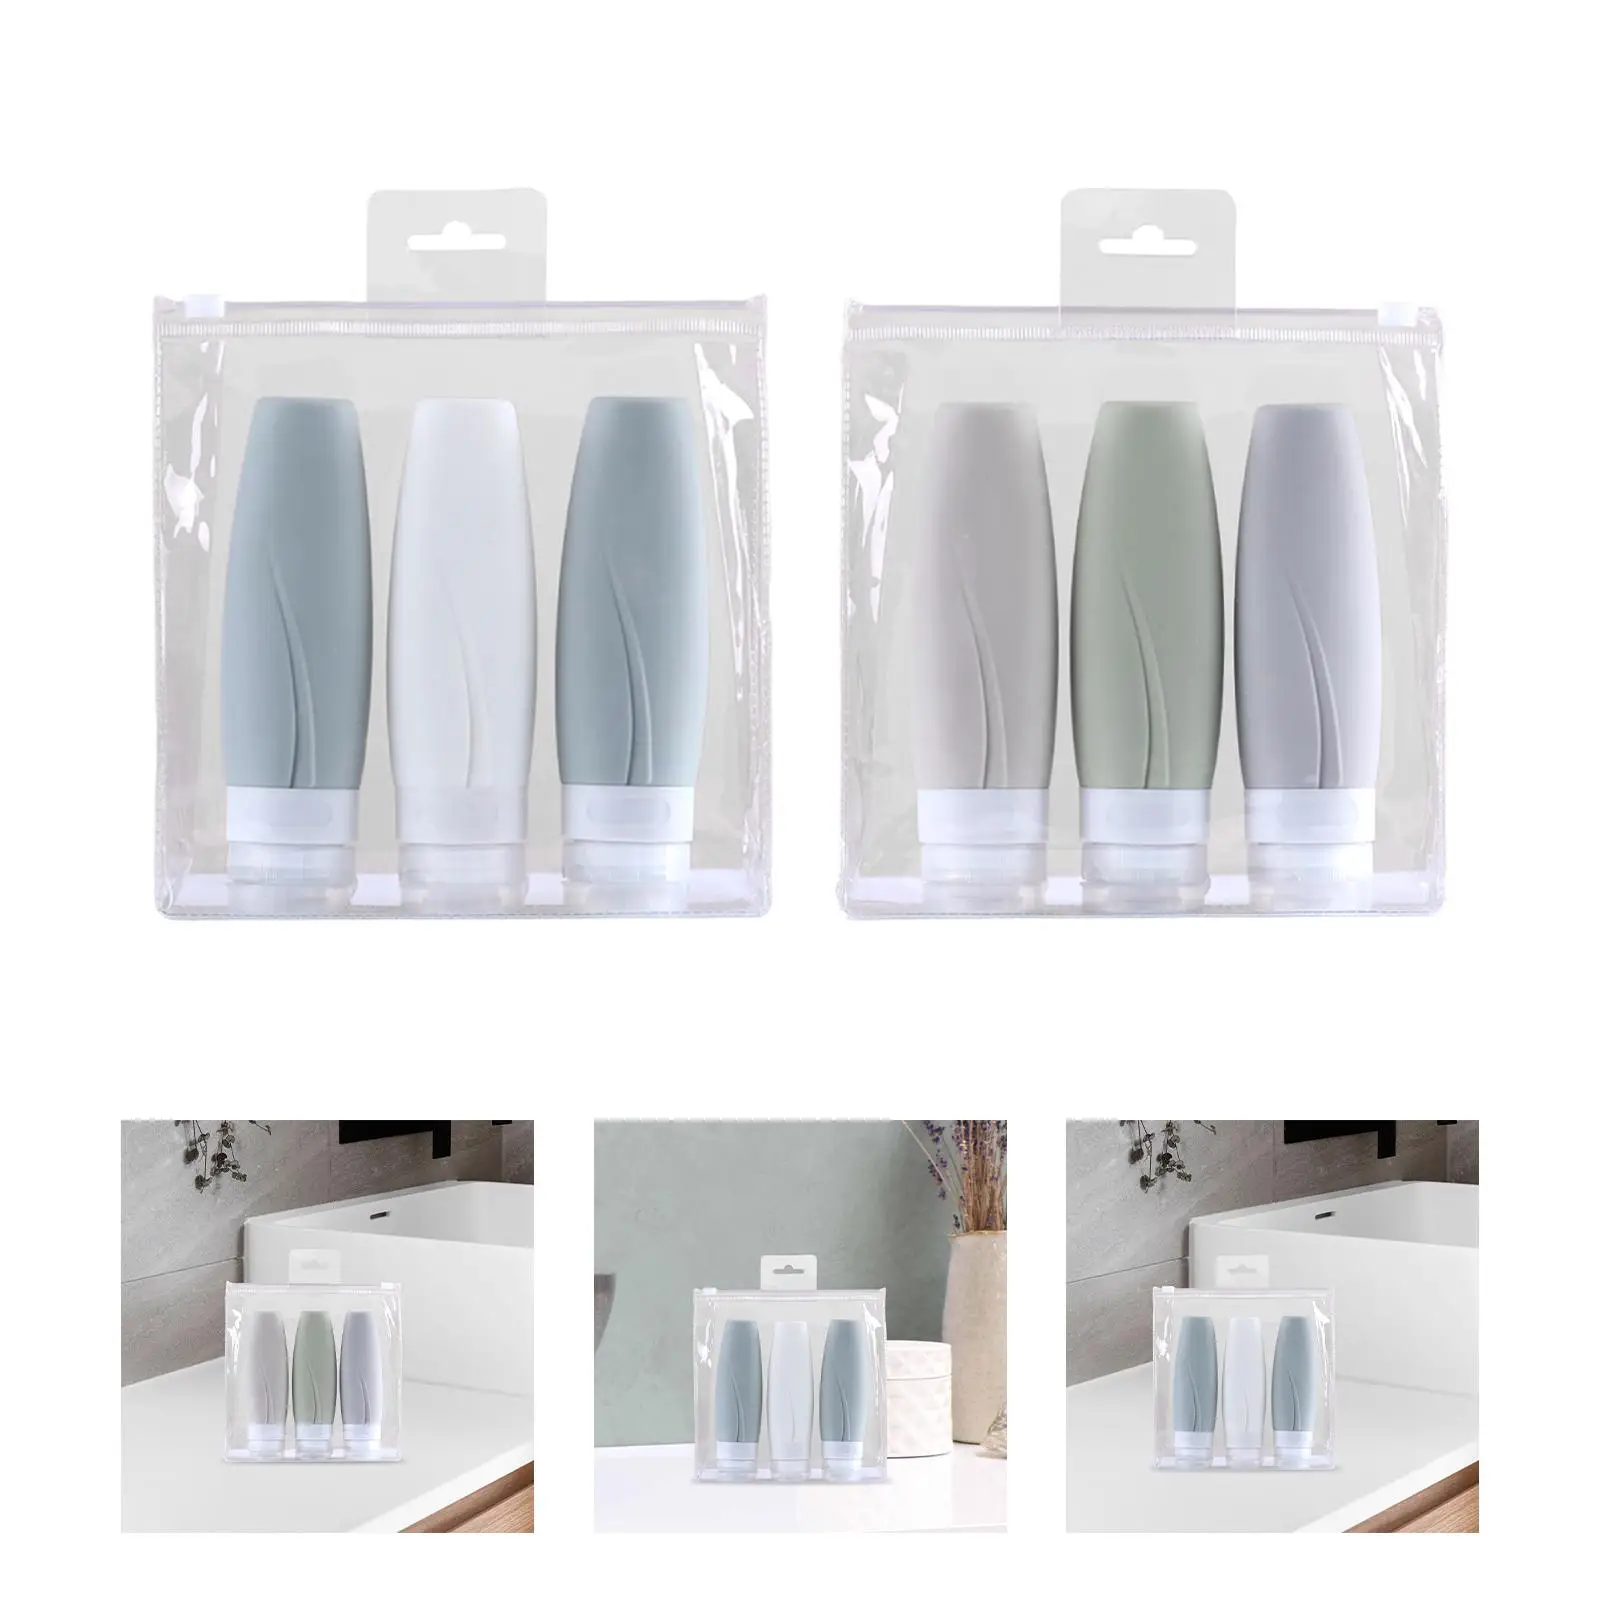 3 Pieces Travel Bottles Refillable Liquid Container Empty Toiletry Container for Cream Conditioner Lotion Soap Shampoo Men Women